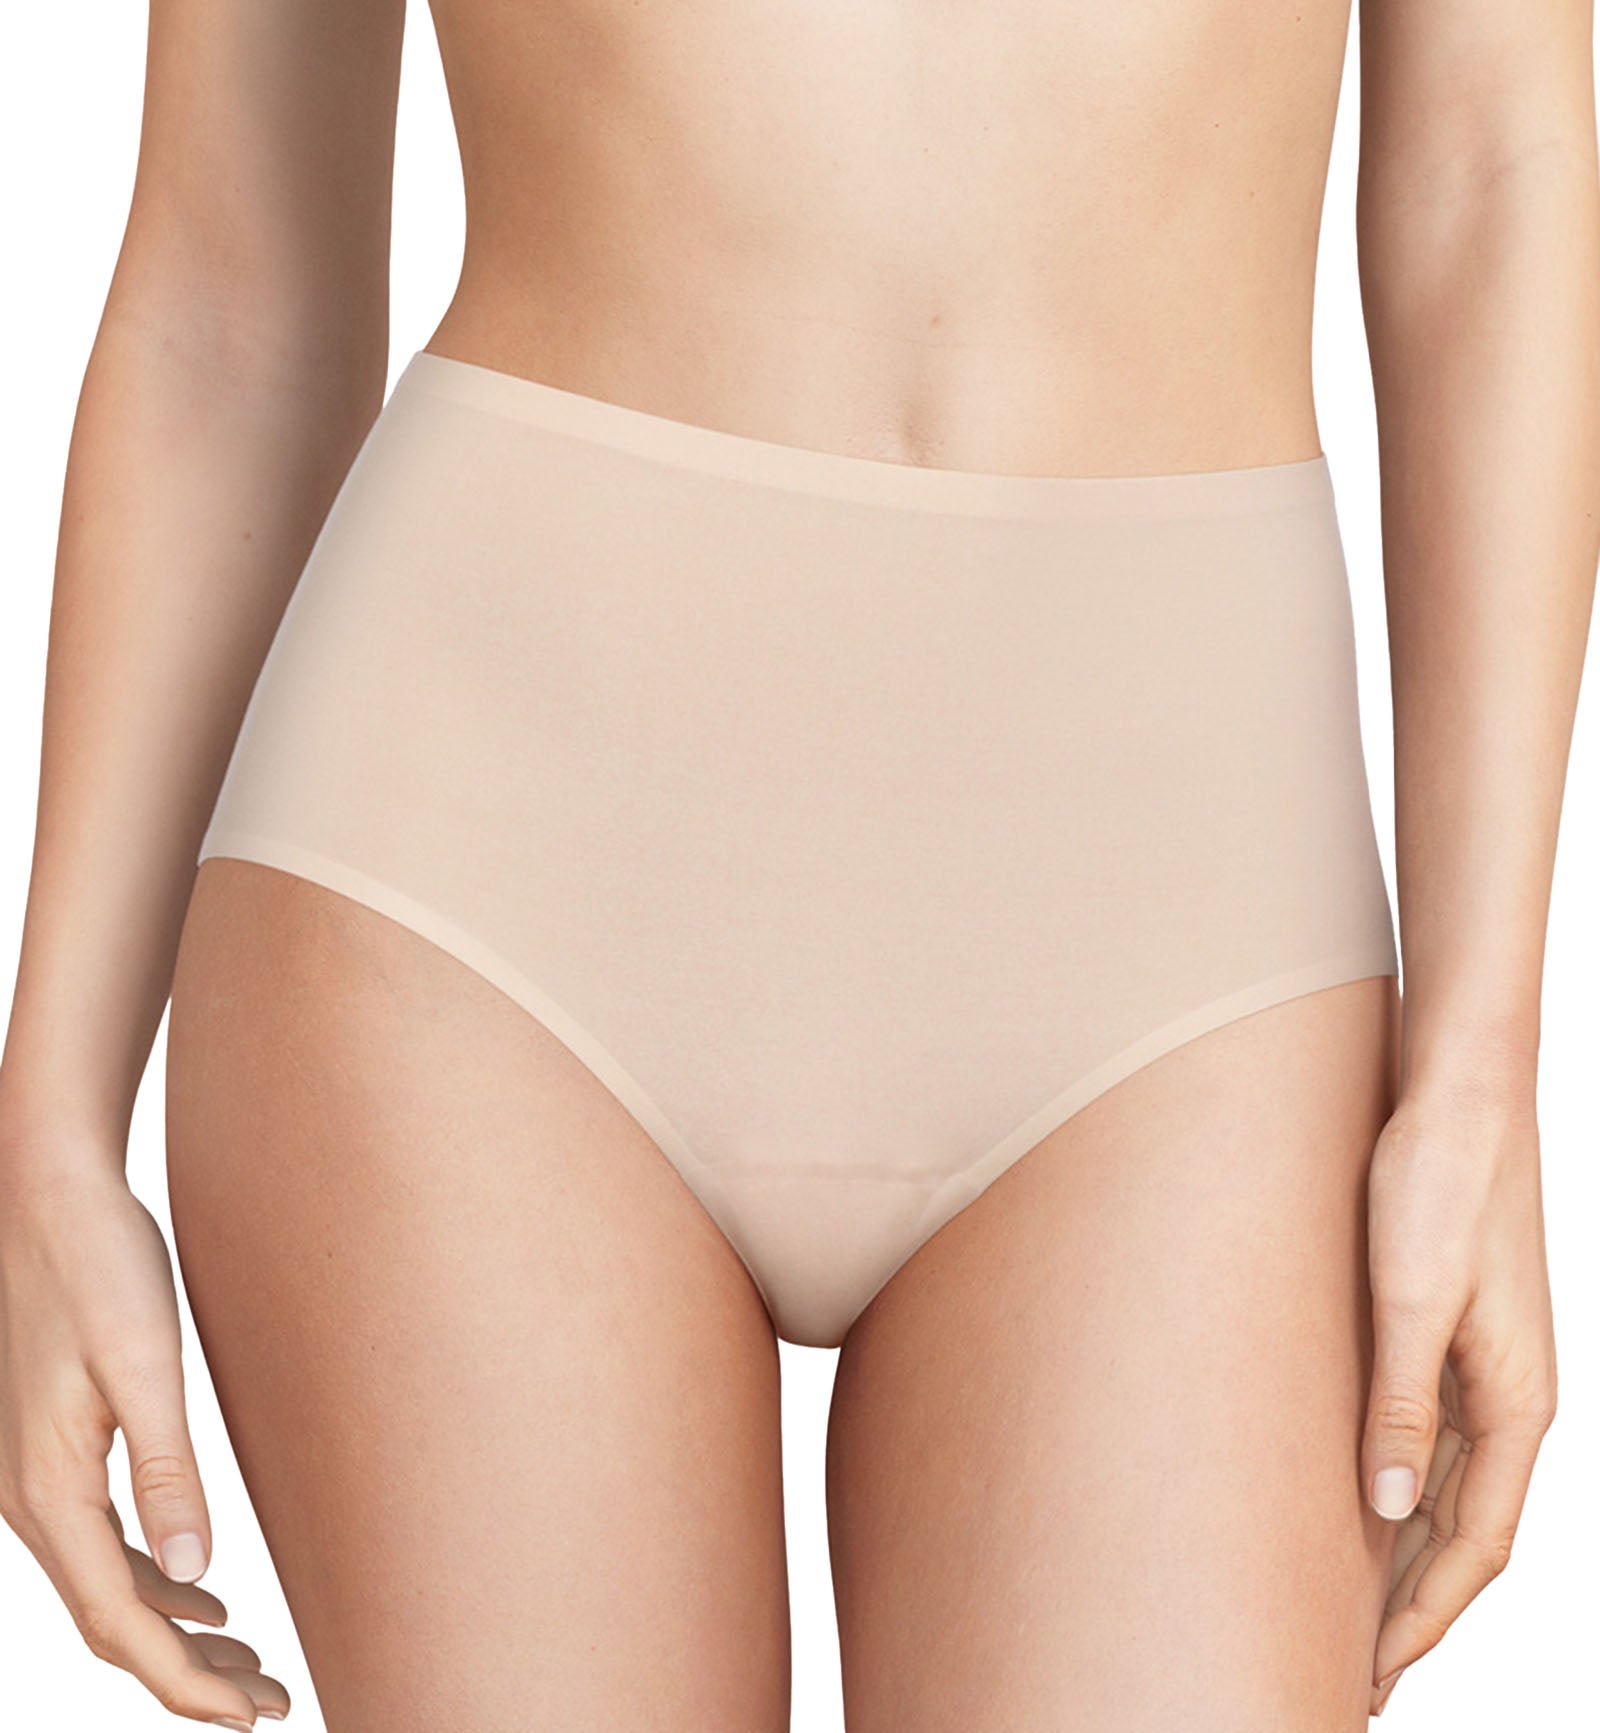 Chantelle Softstretch Brief (C26470),Nude Blush - Nude Blush,One Size